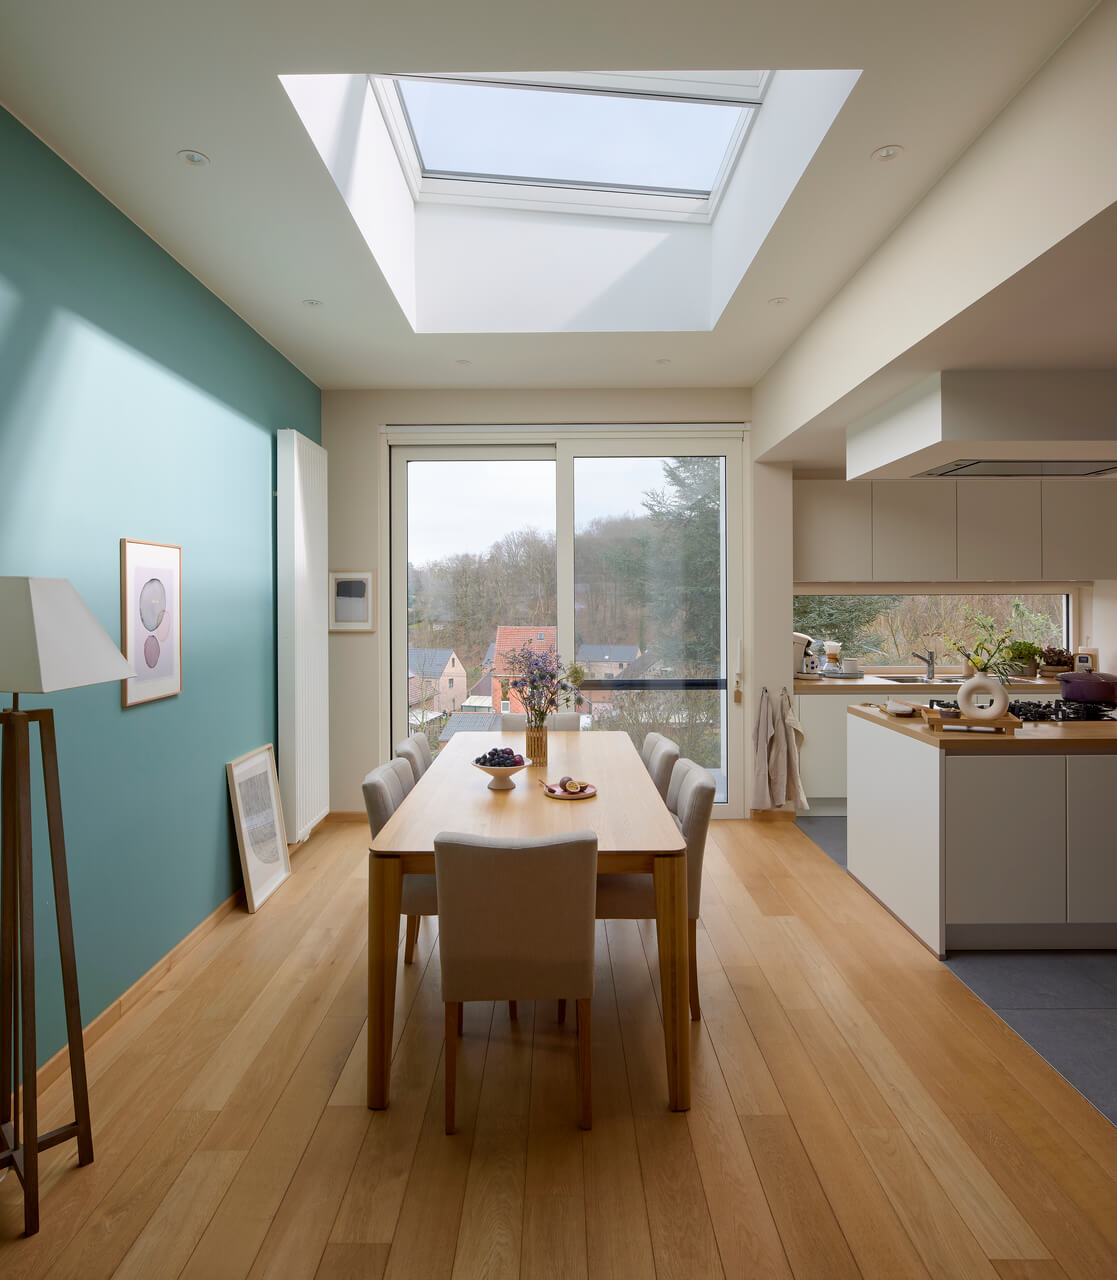 A sunny dining room with flat roof window above the table.